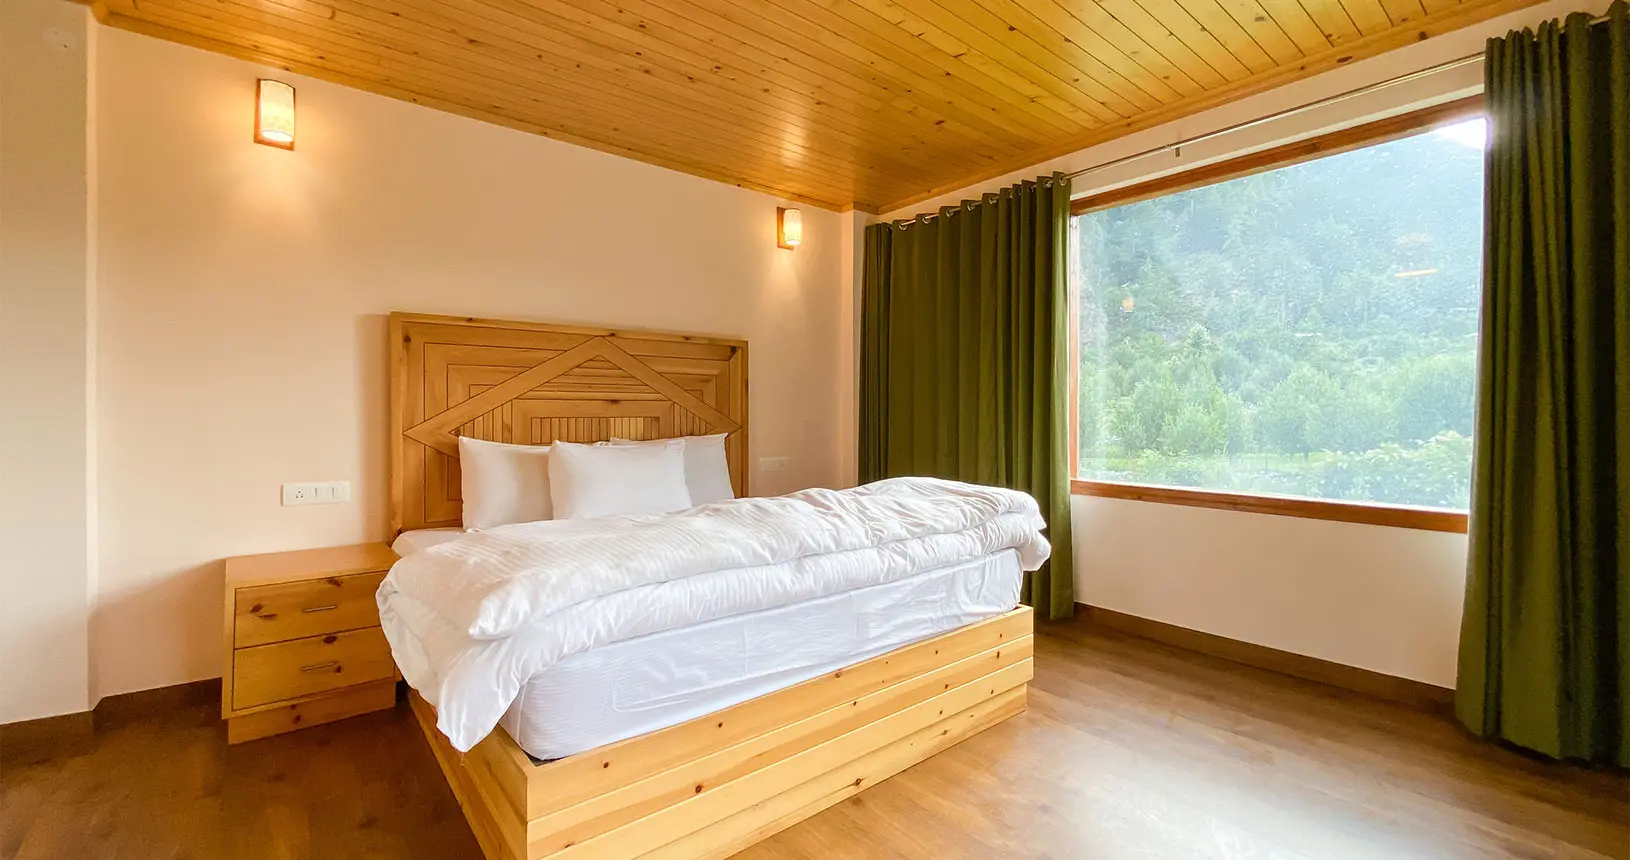 Bed and orchard view from family suite at Hotel Batseri, Sangla.